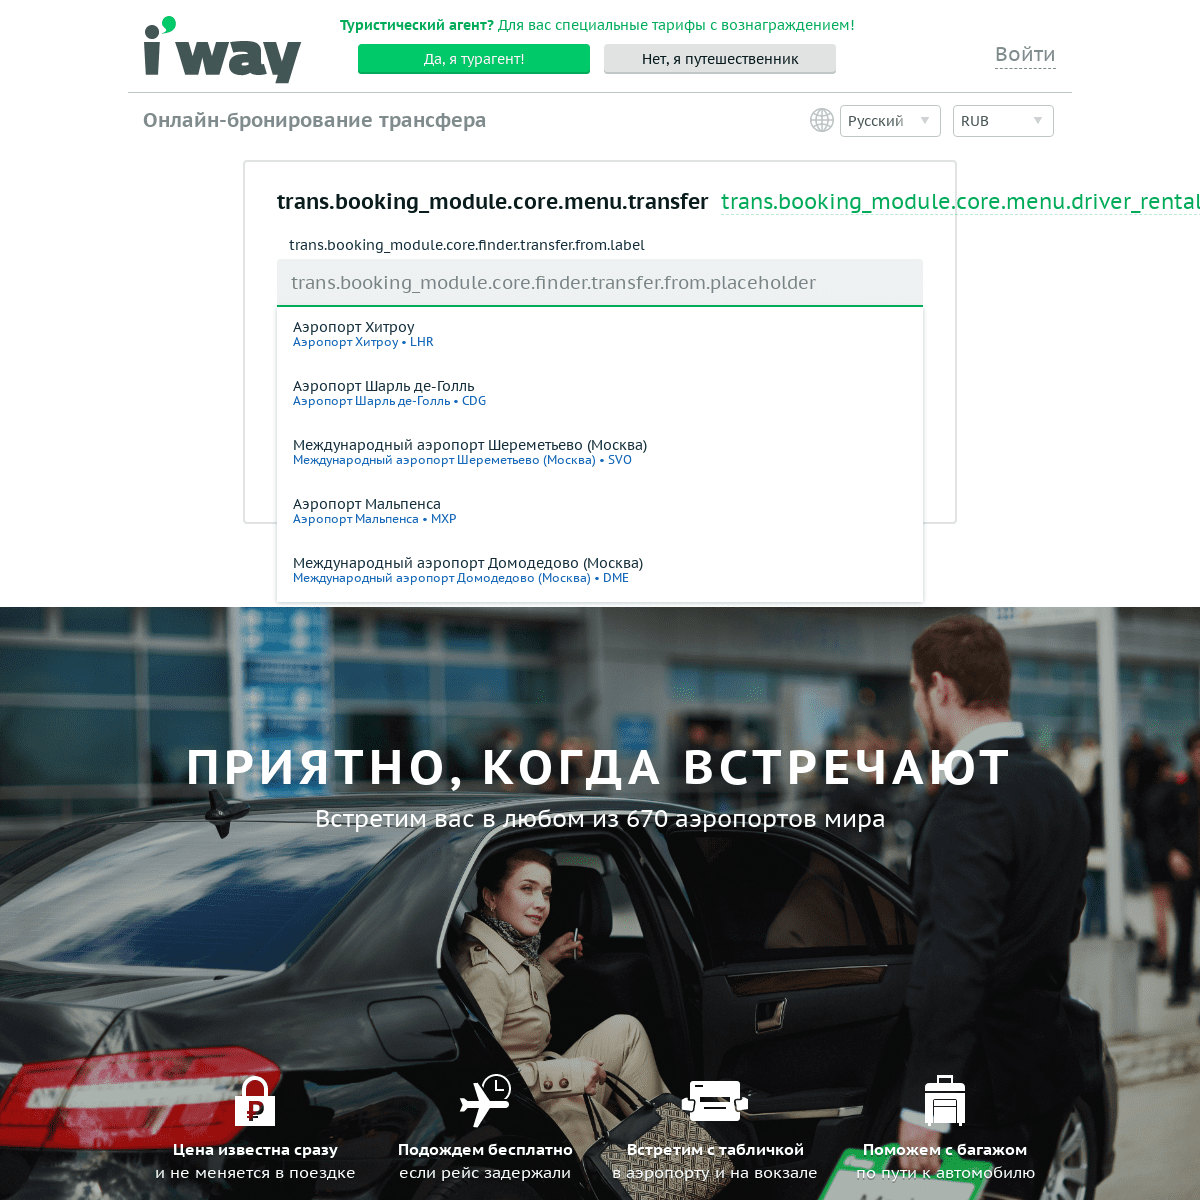 A complete backup of iway.ru